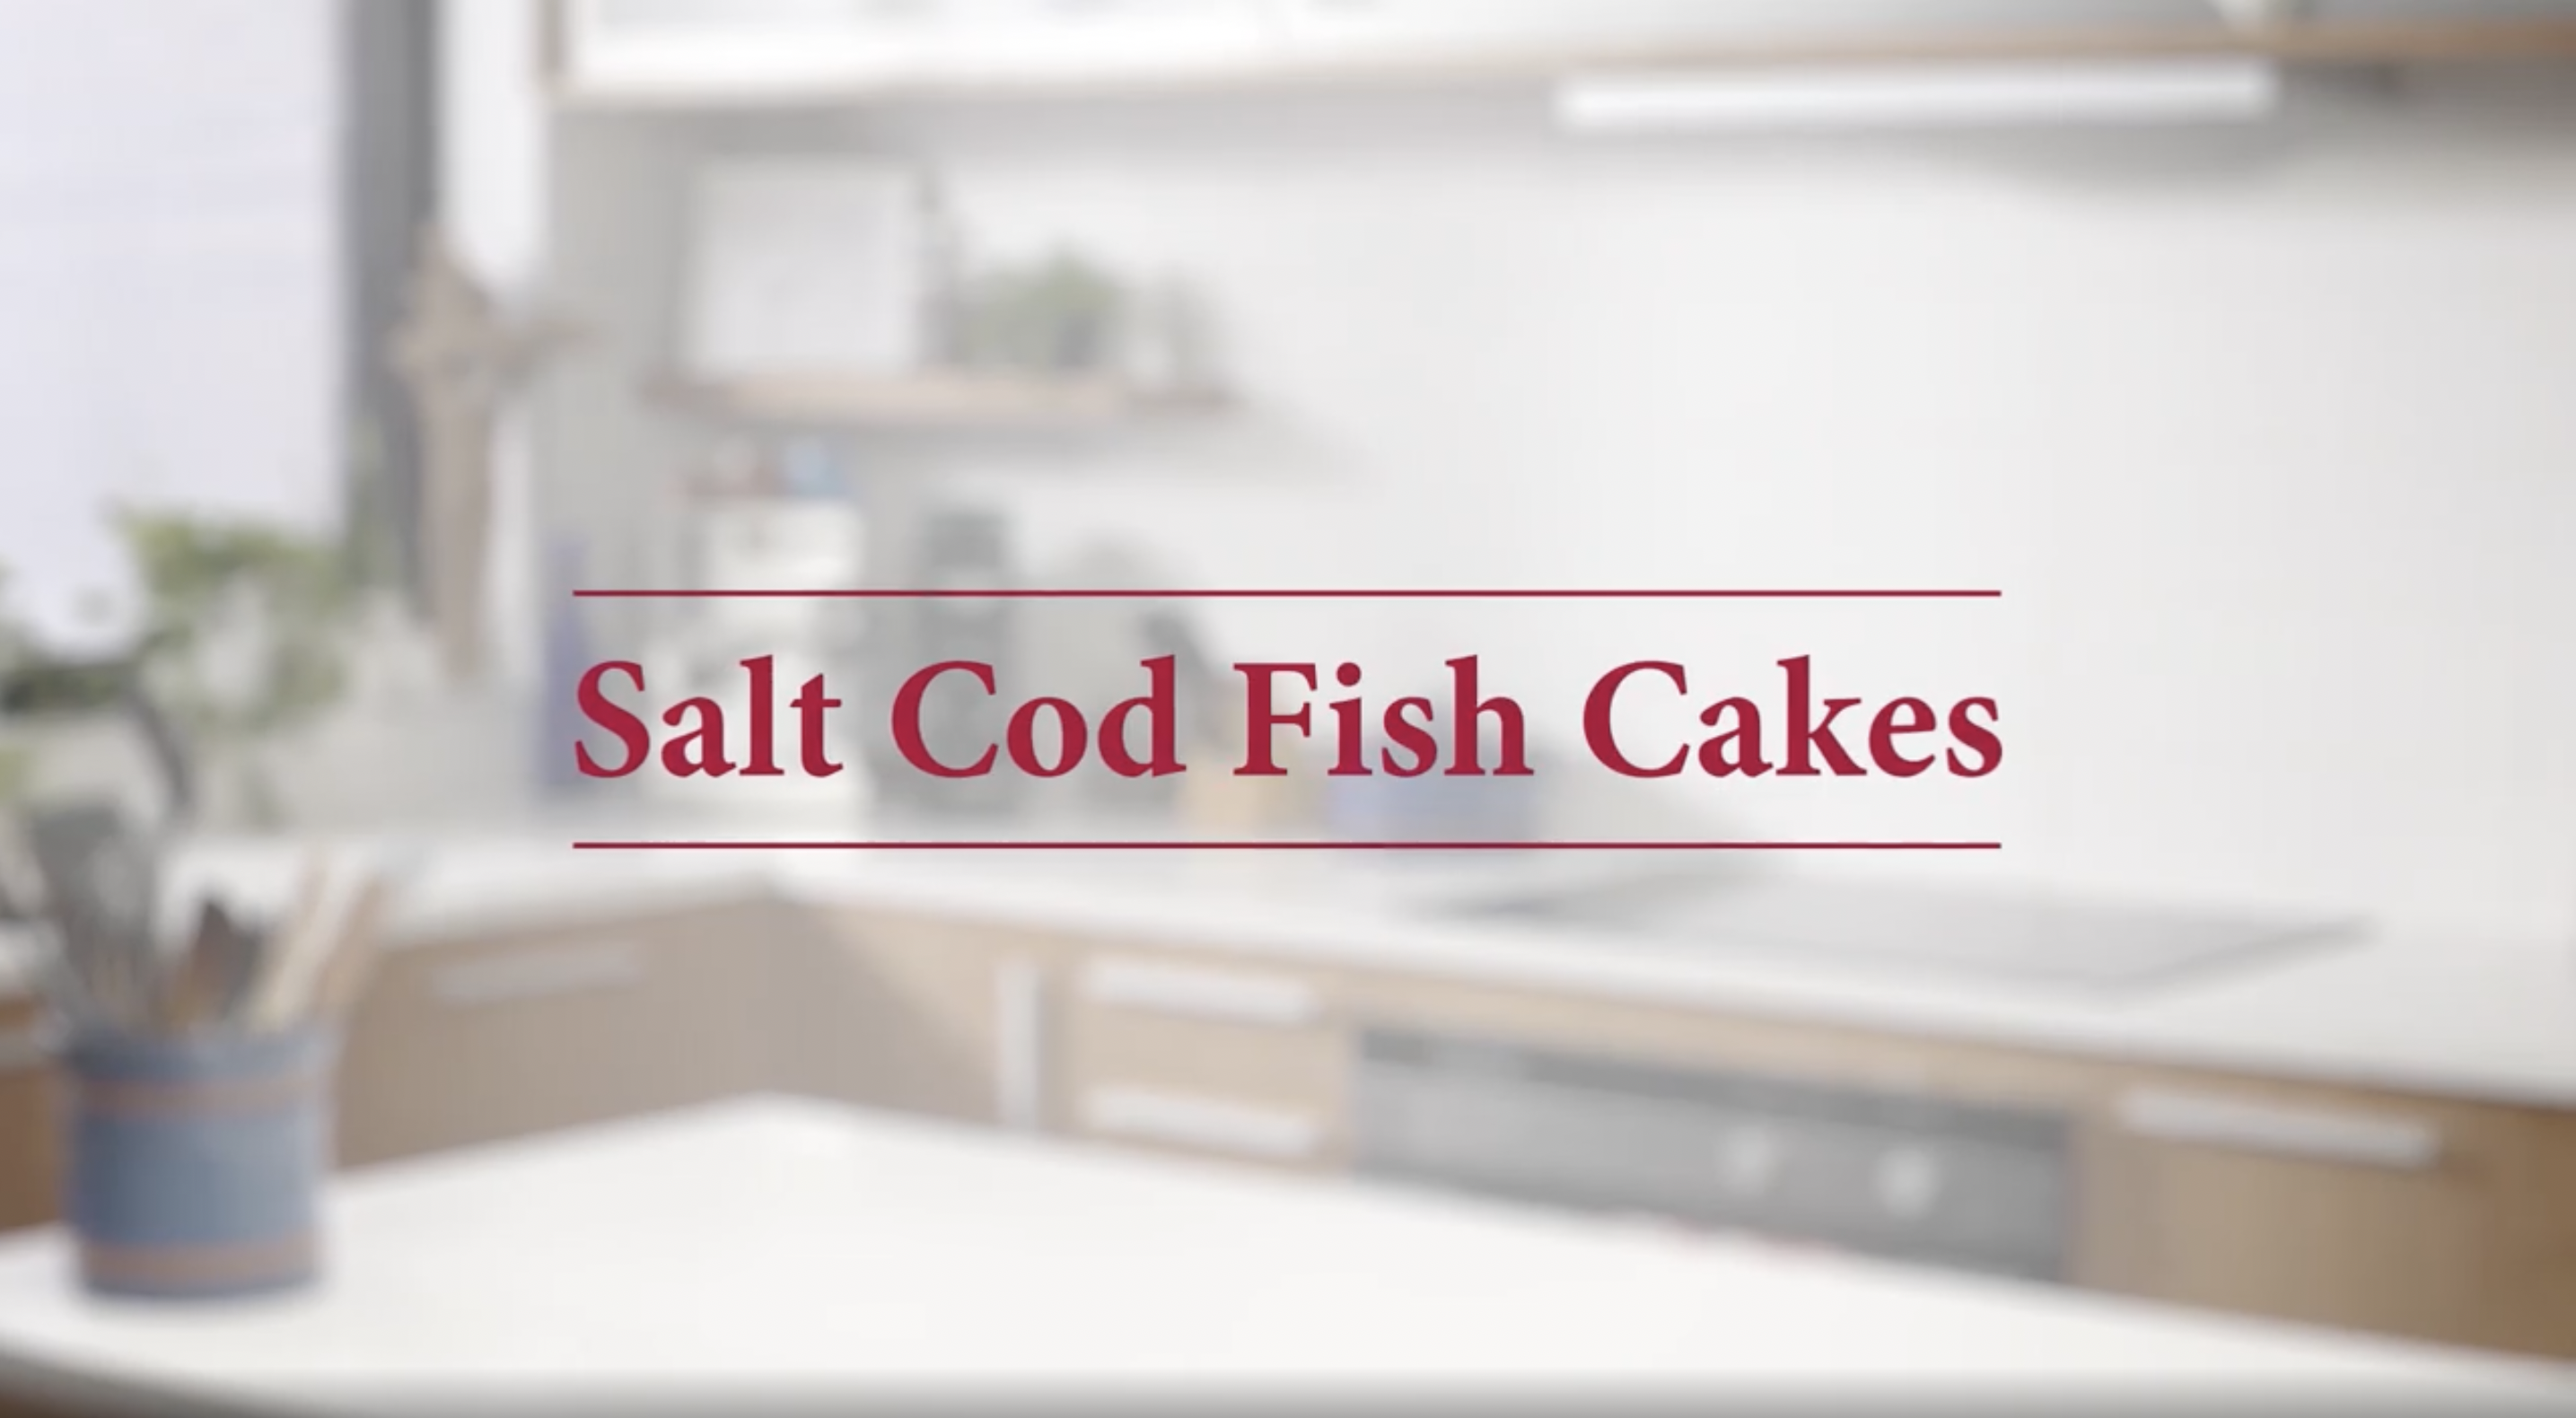 Grandma's Kitchen Table Episode 3 of 6- Salt Cod Fish Cakes with Charles Taker